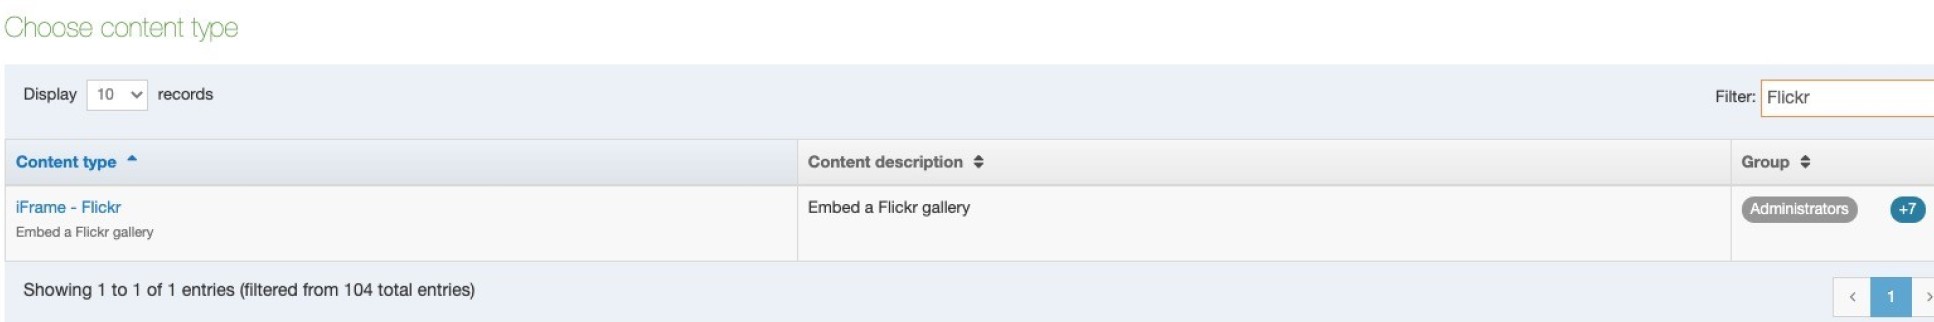 Content list filtered by 'Flickr'